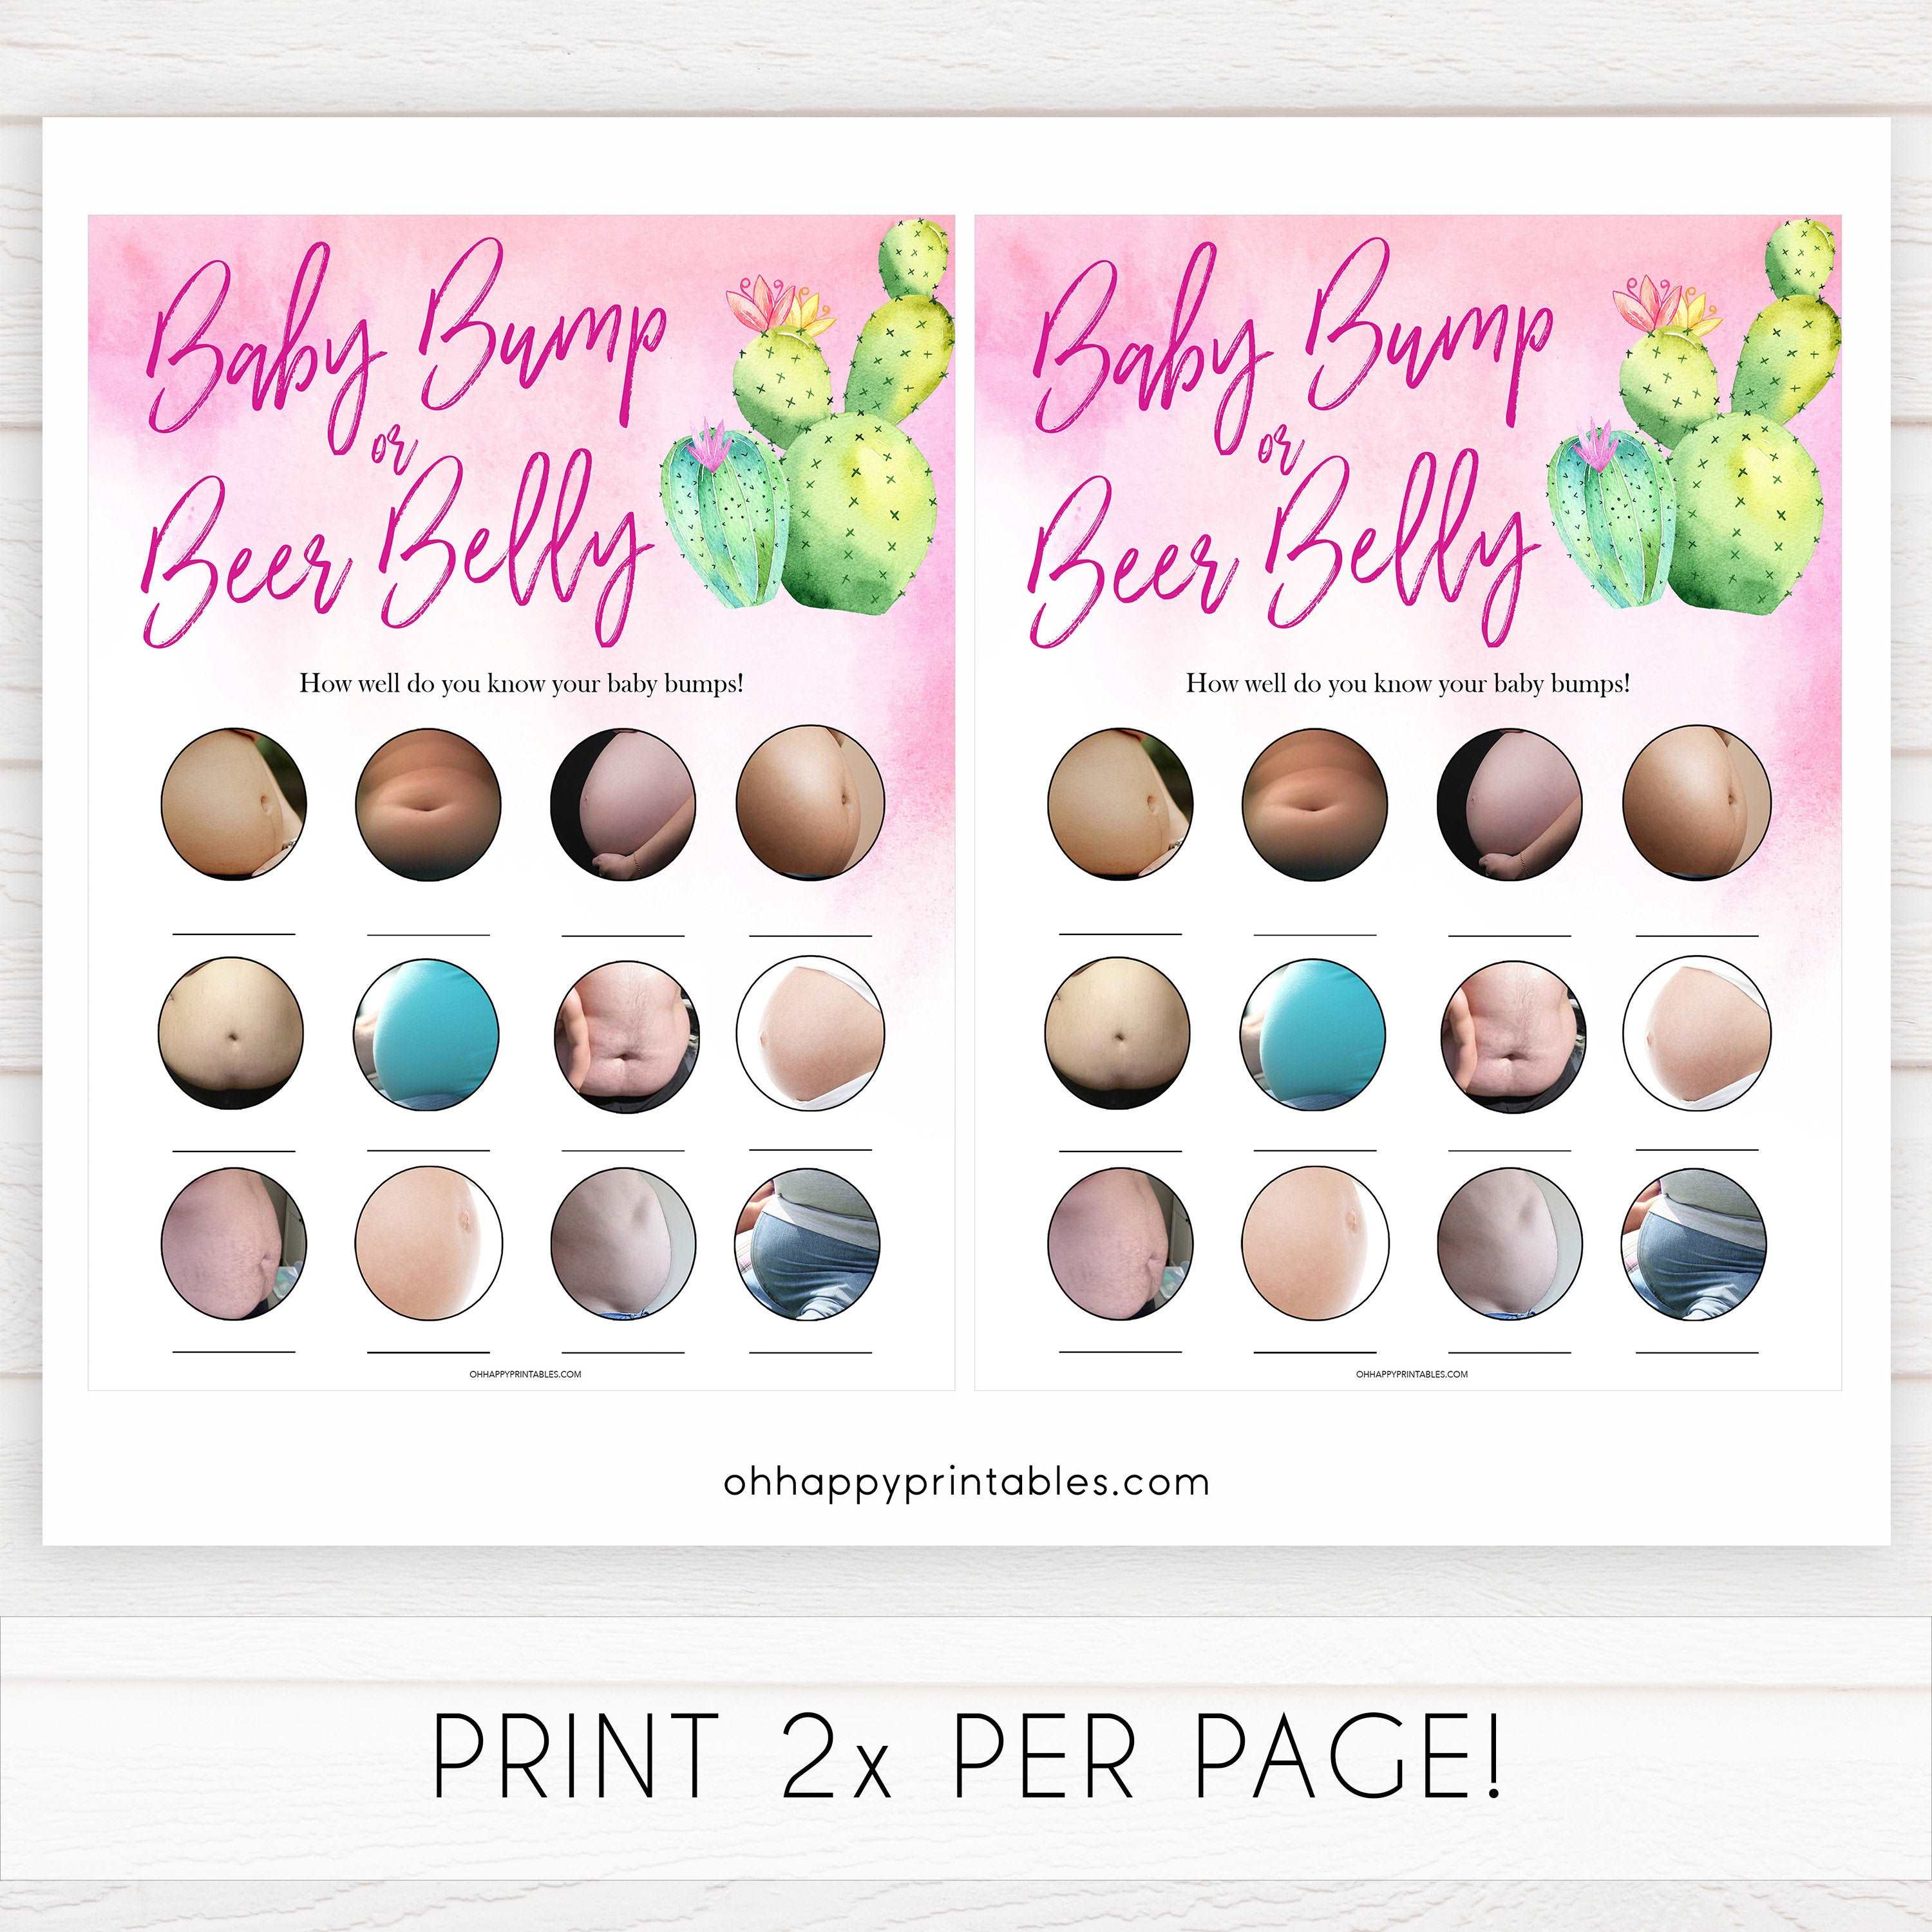 Cactus baby games, labor or porn, baby bump or beer belly, boobs or butts,printable baby shower games, Mexican baby shower, fun baby games, top baby games, best baby games, baby shower games